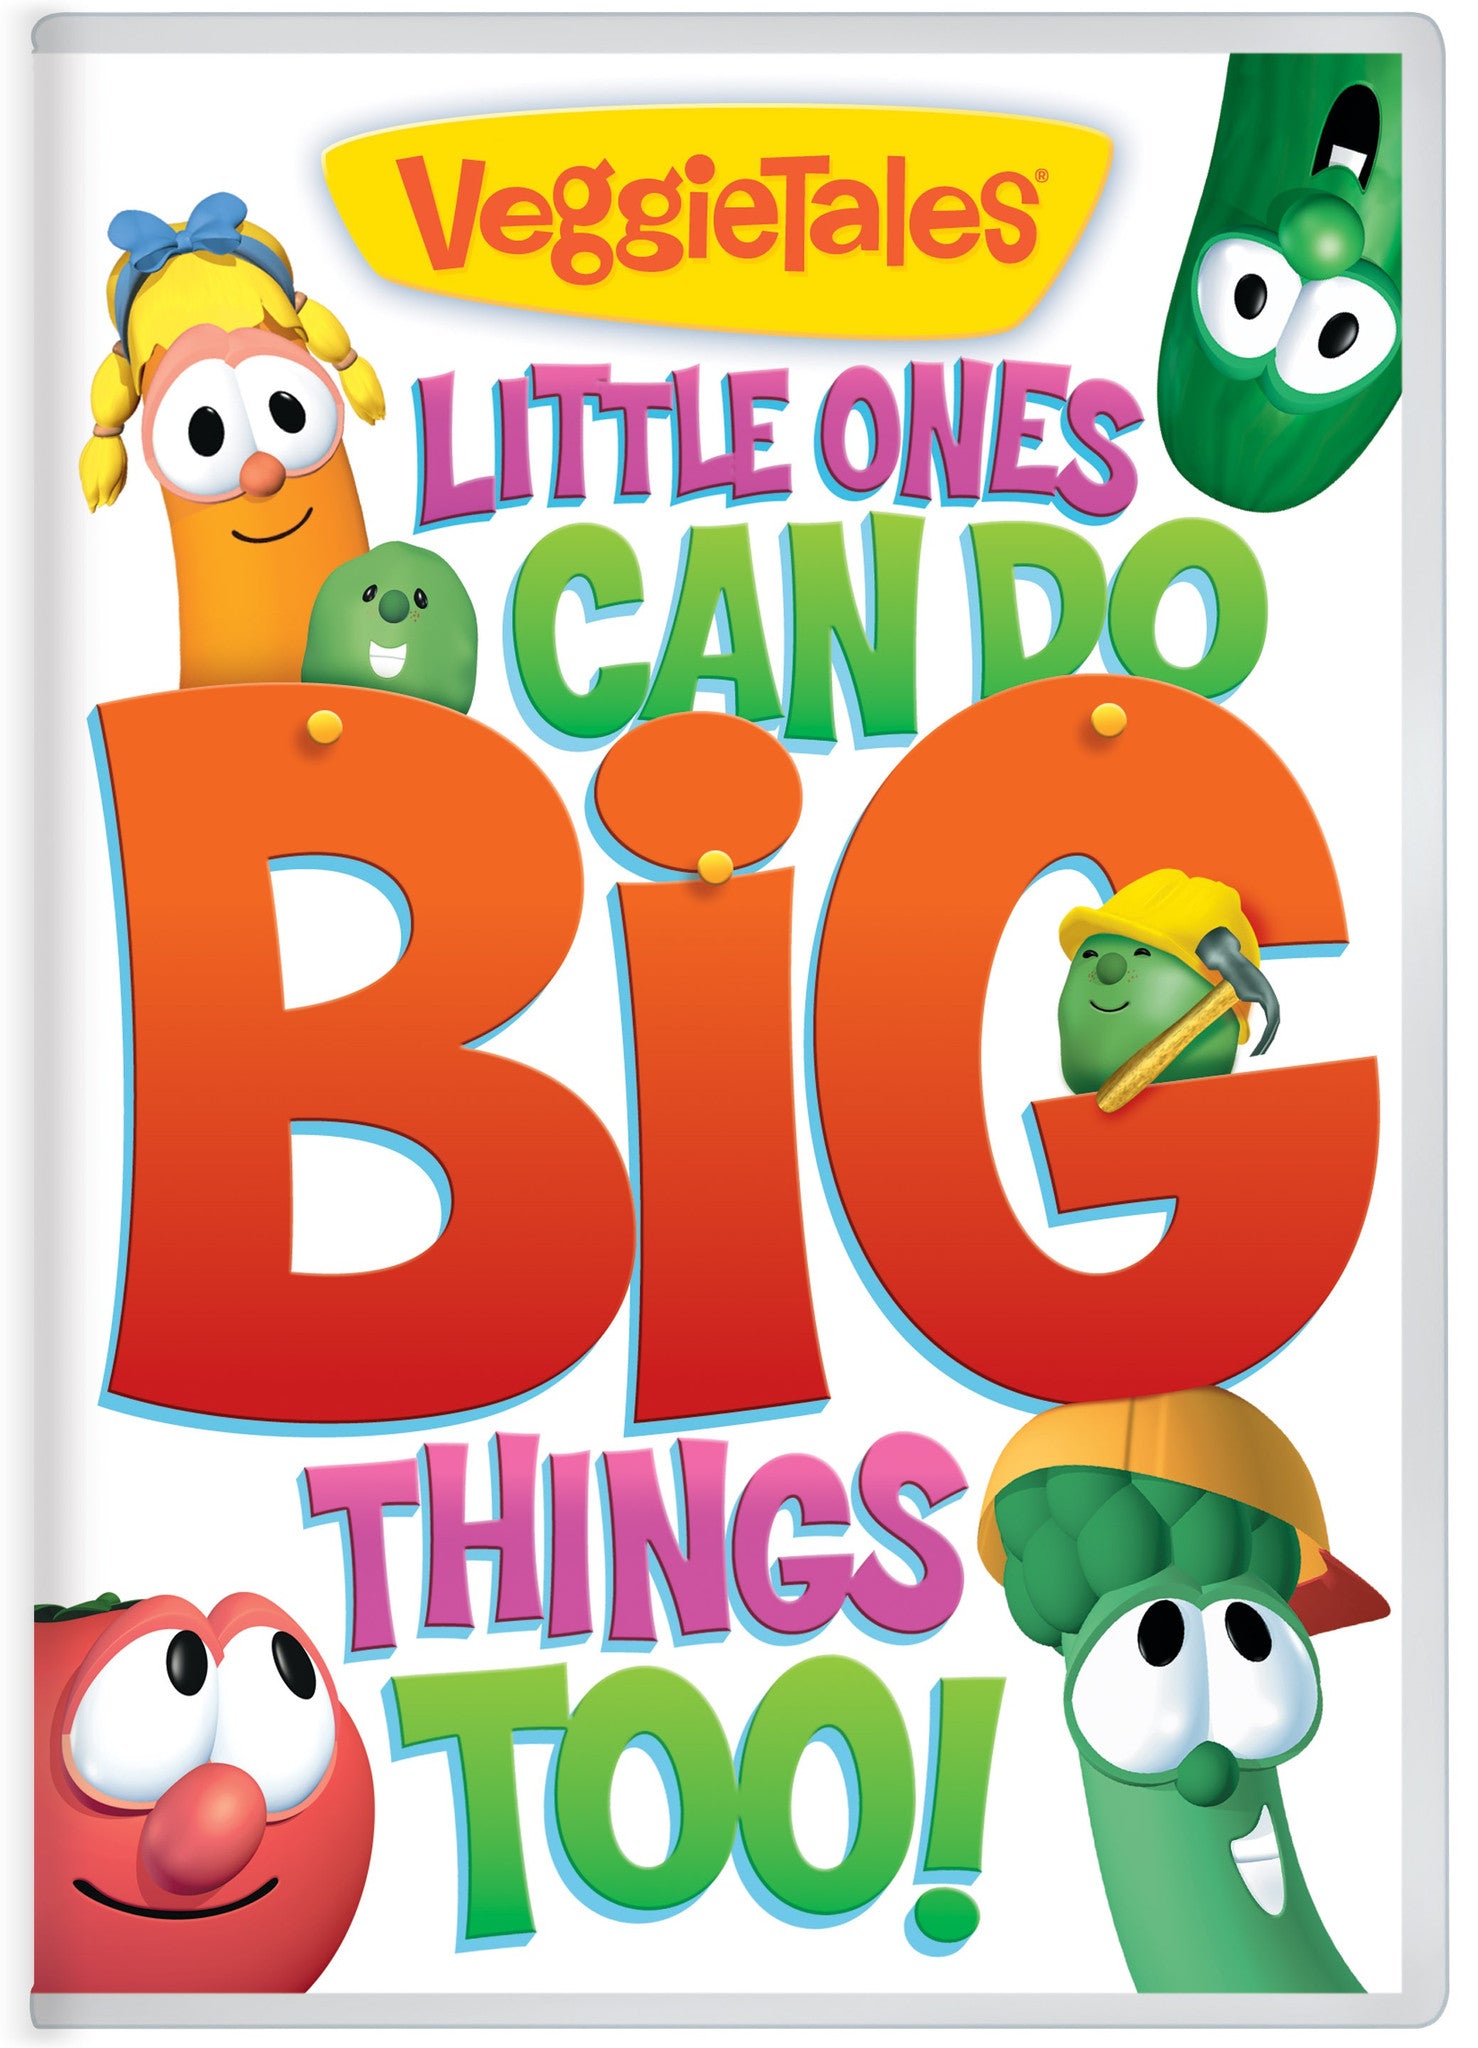 Little Ones Can Do Big Things Too! VeggieTales DVD